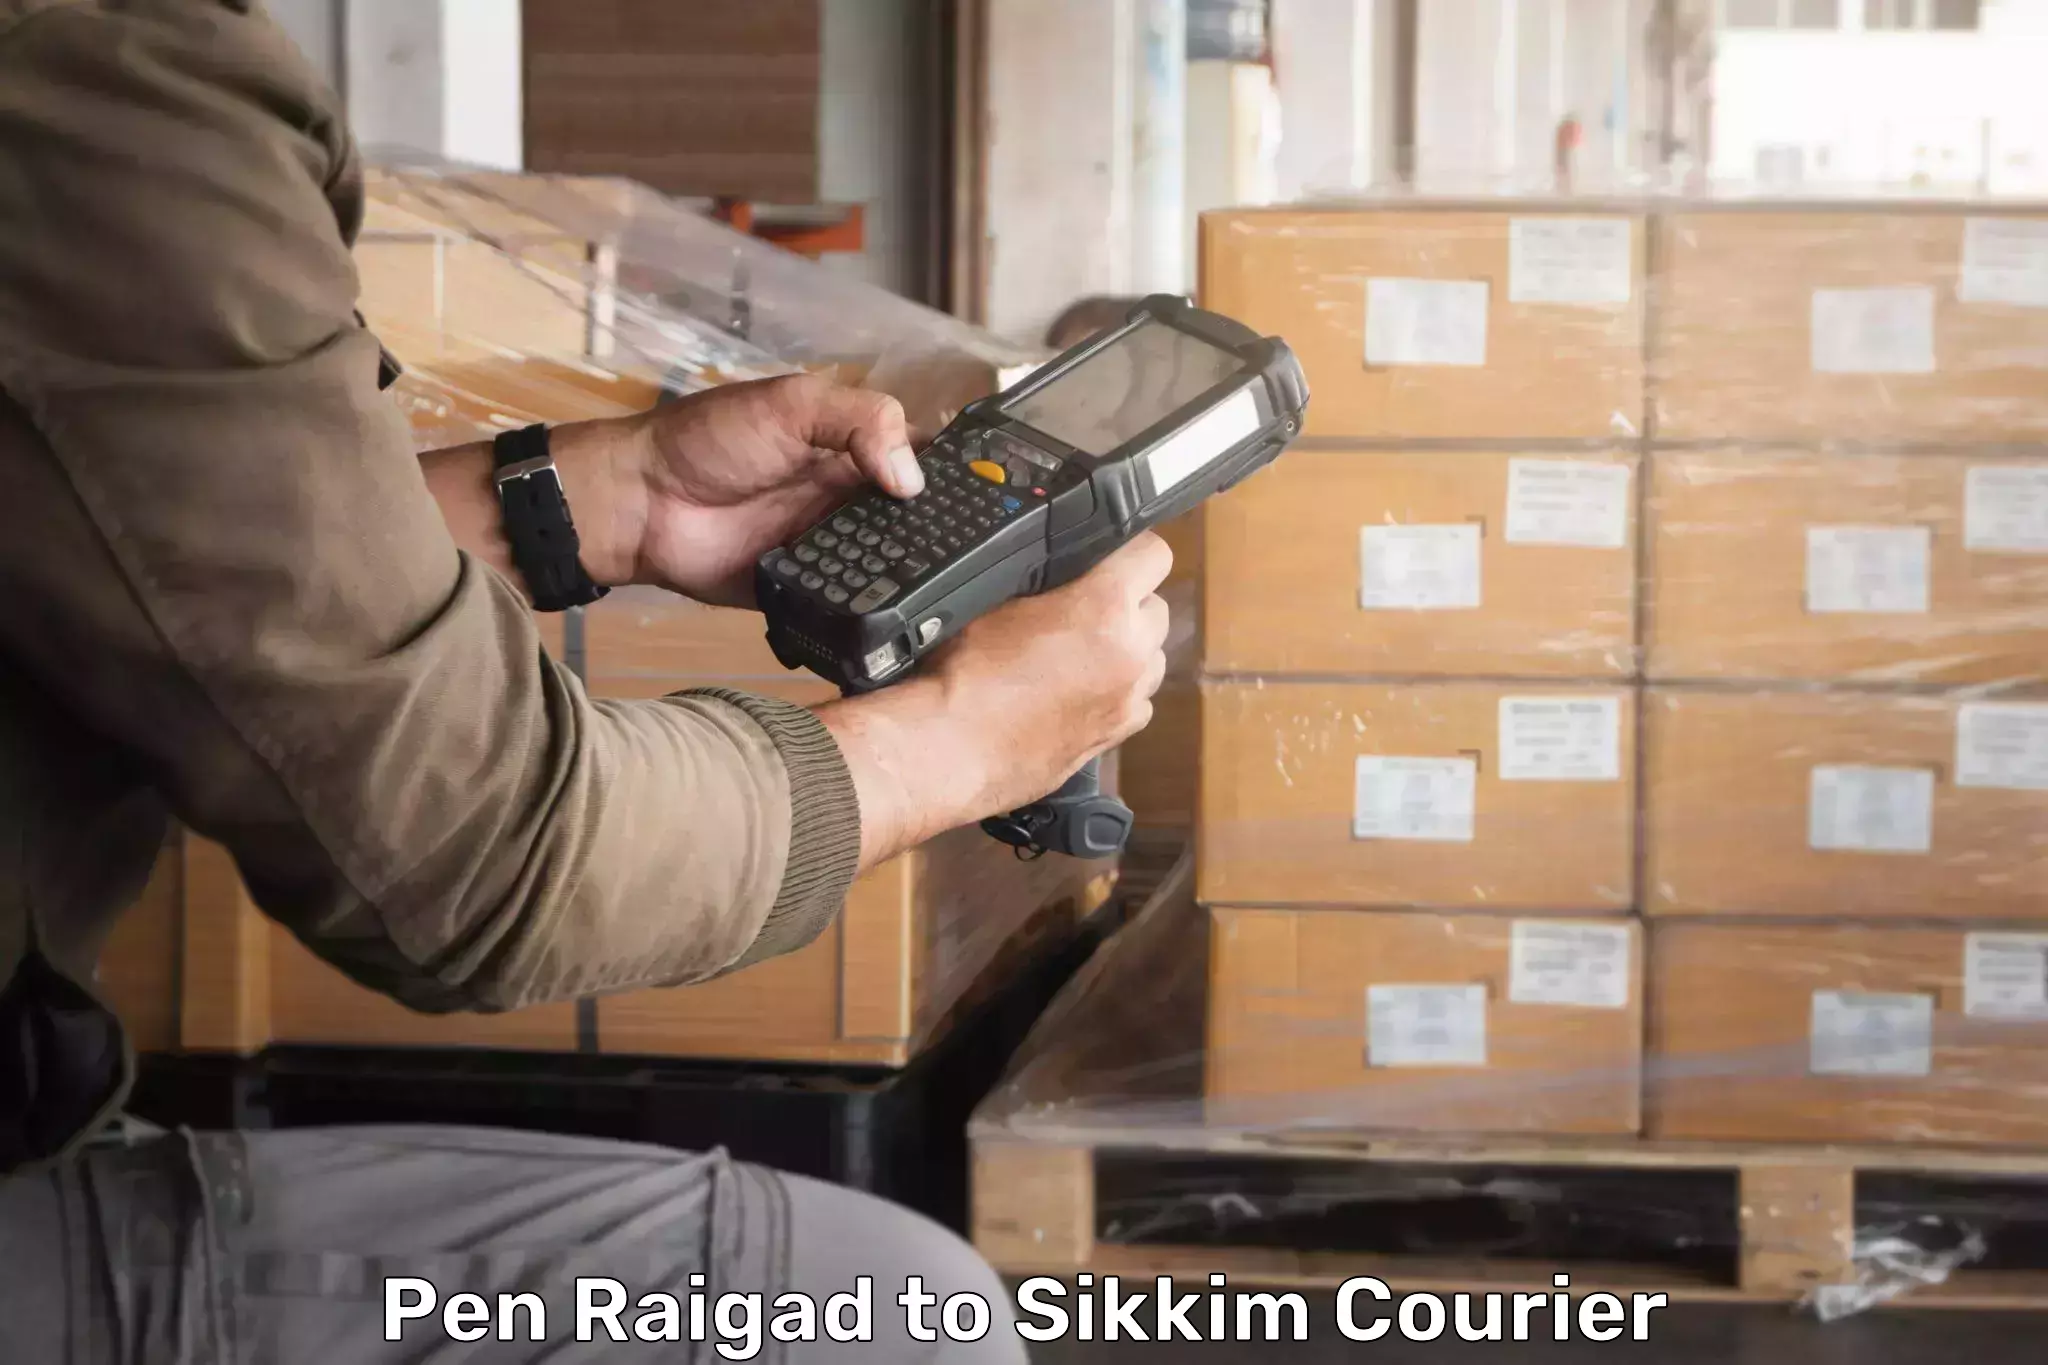 Specialized shipment handling in Pen Raigad to Mangan